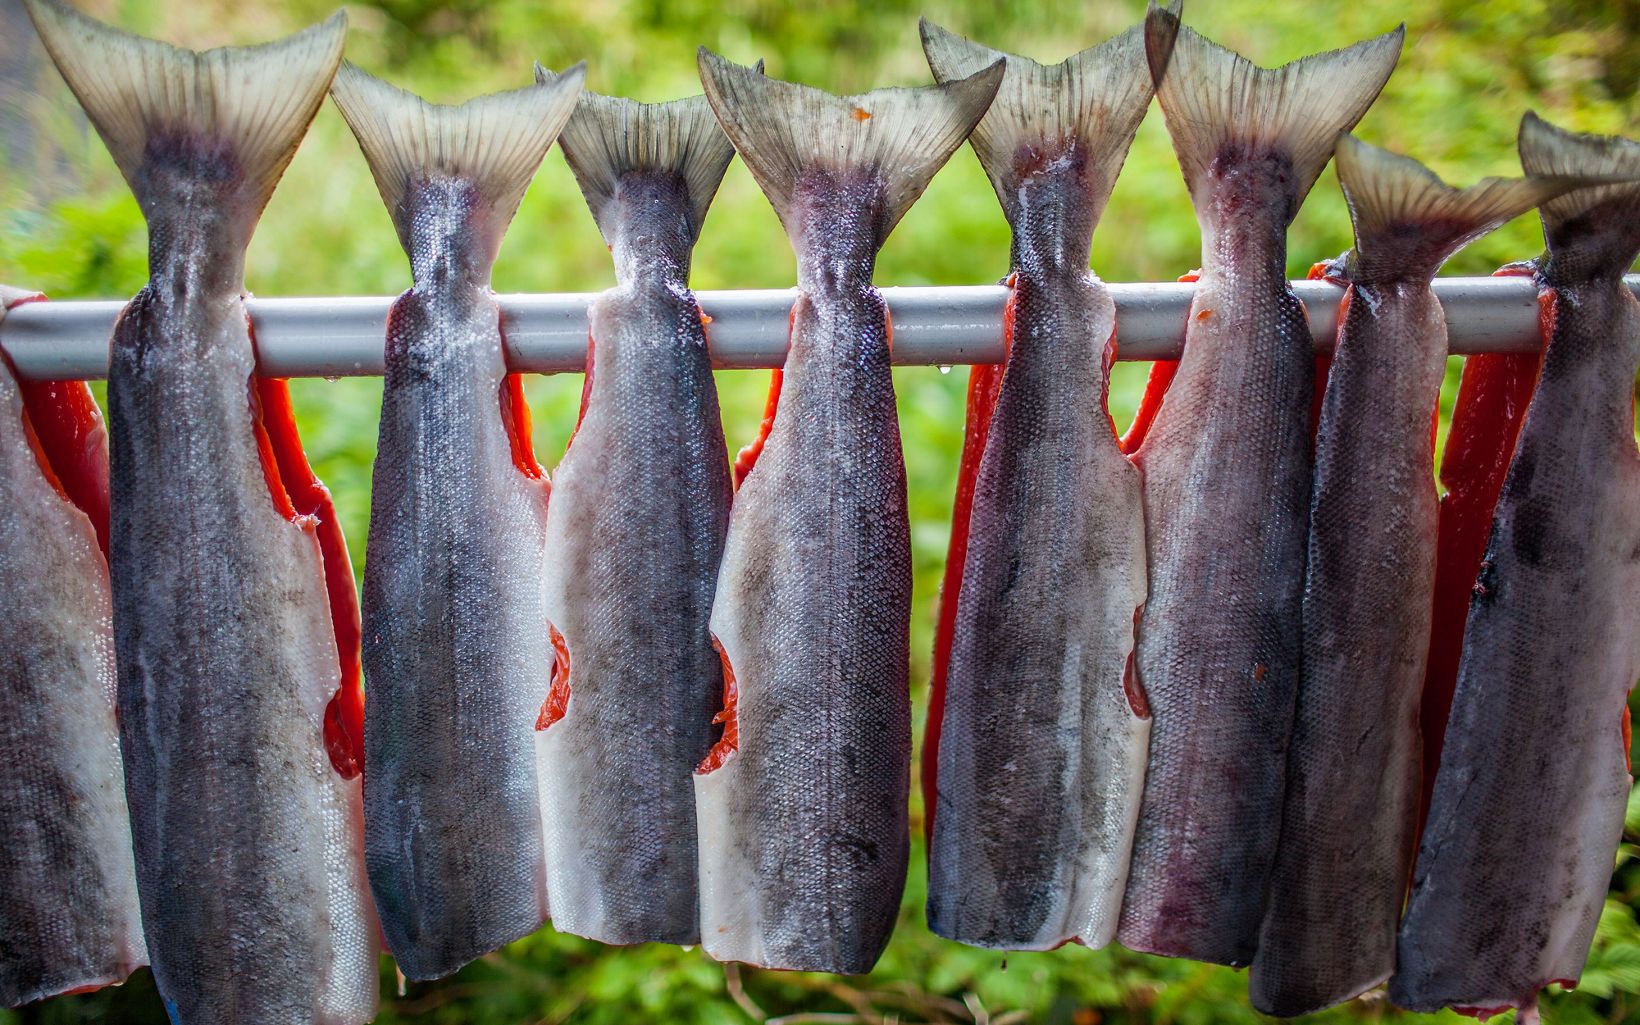 Nine filleted salmon hang from a metal bar.